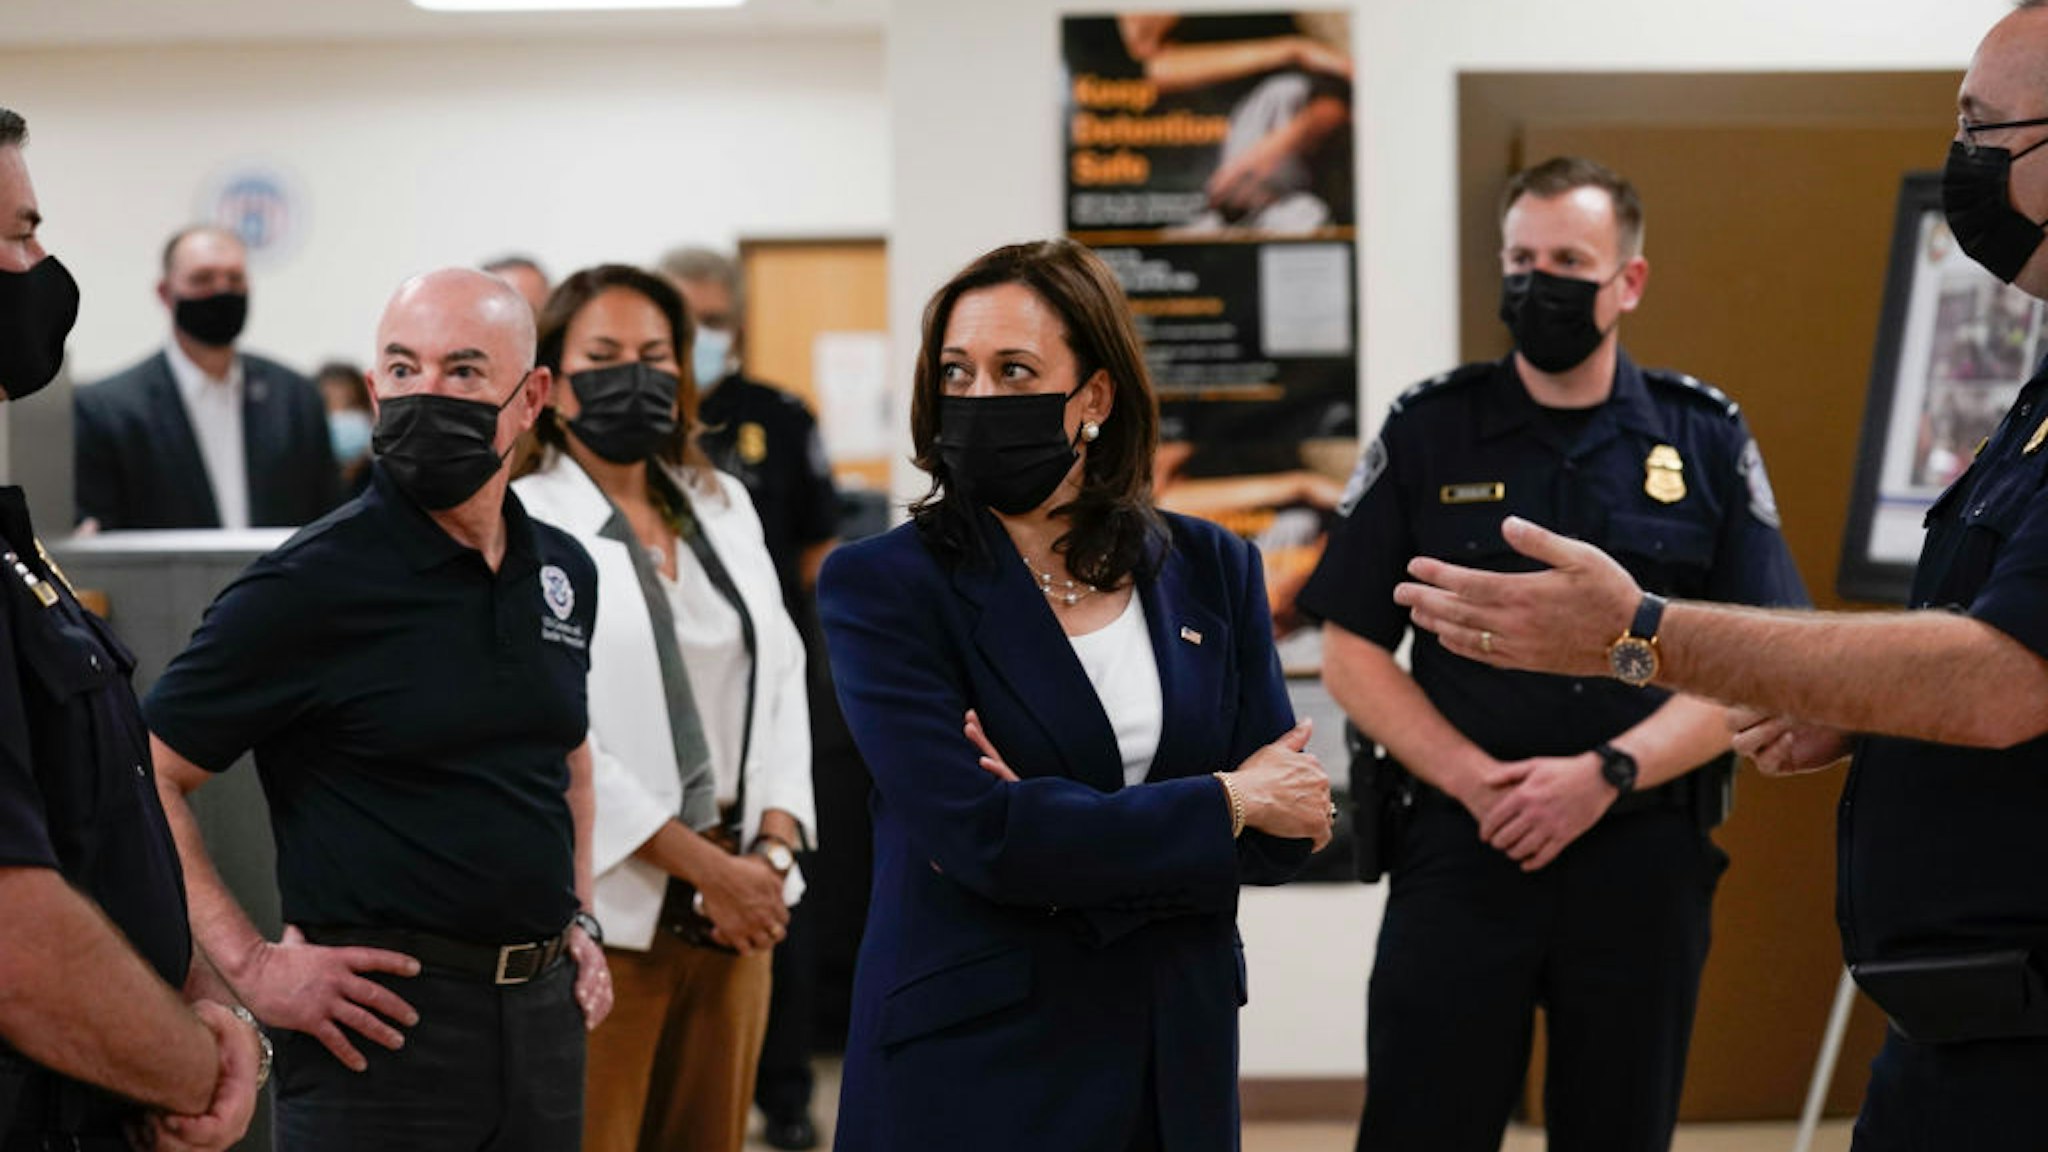 U.S. Vice President Kamala Harris, right, and Alejandro Mayorkas, secretary of the U.S. Department of Homeland Security, tour the Paso del Norte Port of Entry in El Paso, Texas, U.S., on Friday, June 28, 2021. The vice president's visit to the southern border comes after months of denunciations from Republicans, as well as frustration from some Democrats, for not having gone to the border after being chosen to address the root causes of migration from Central America to the U.S. Photographer: Yuri Gripas/Abaca/Bloomberg via Getty Images